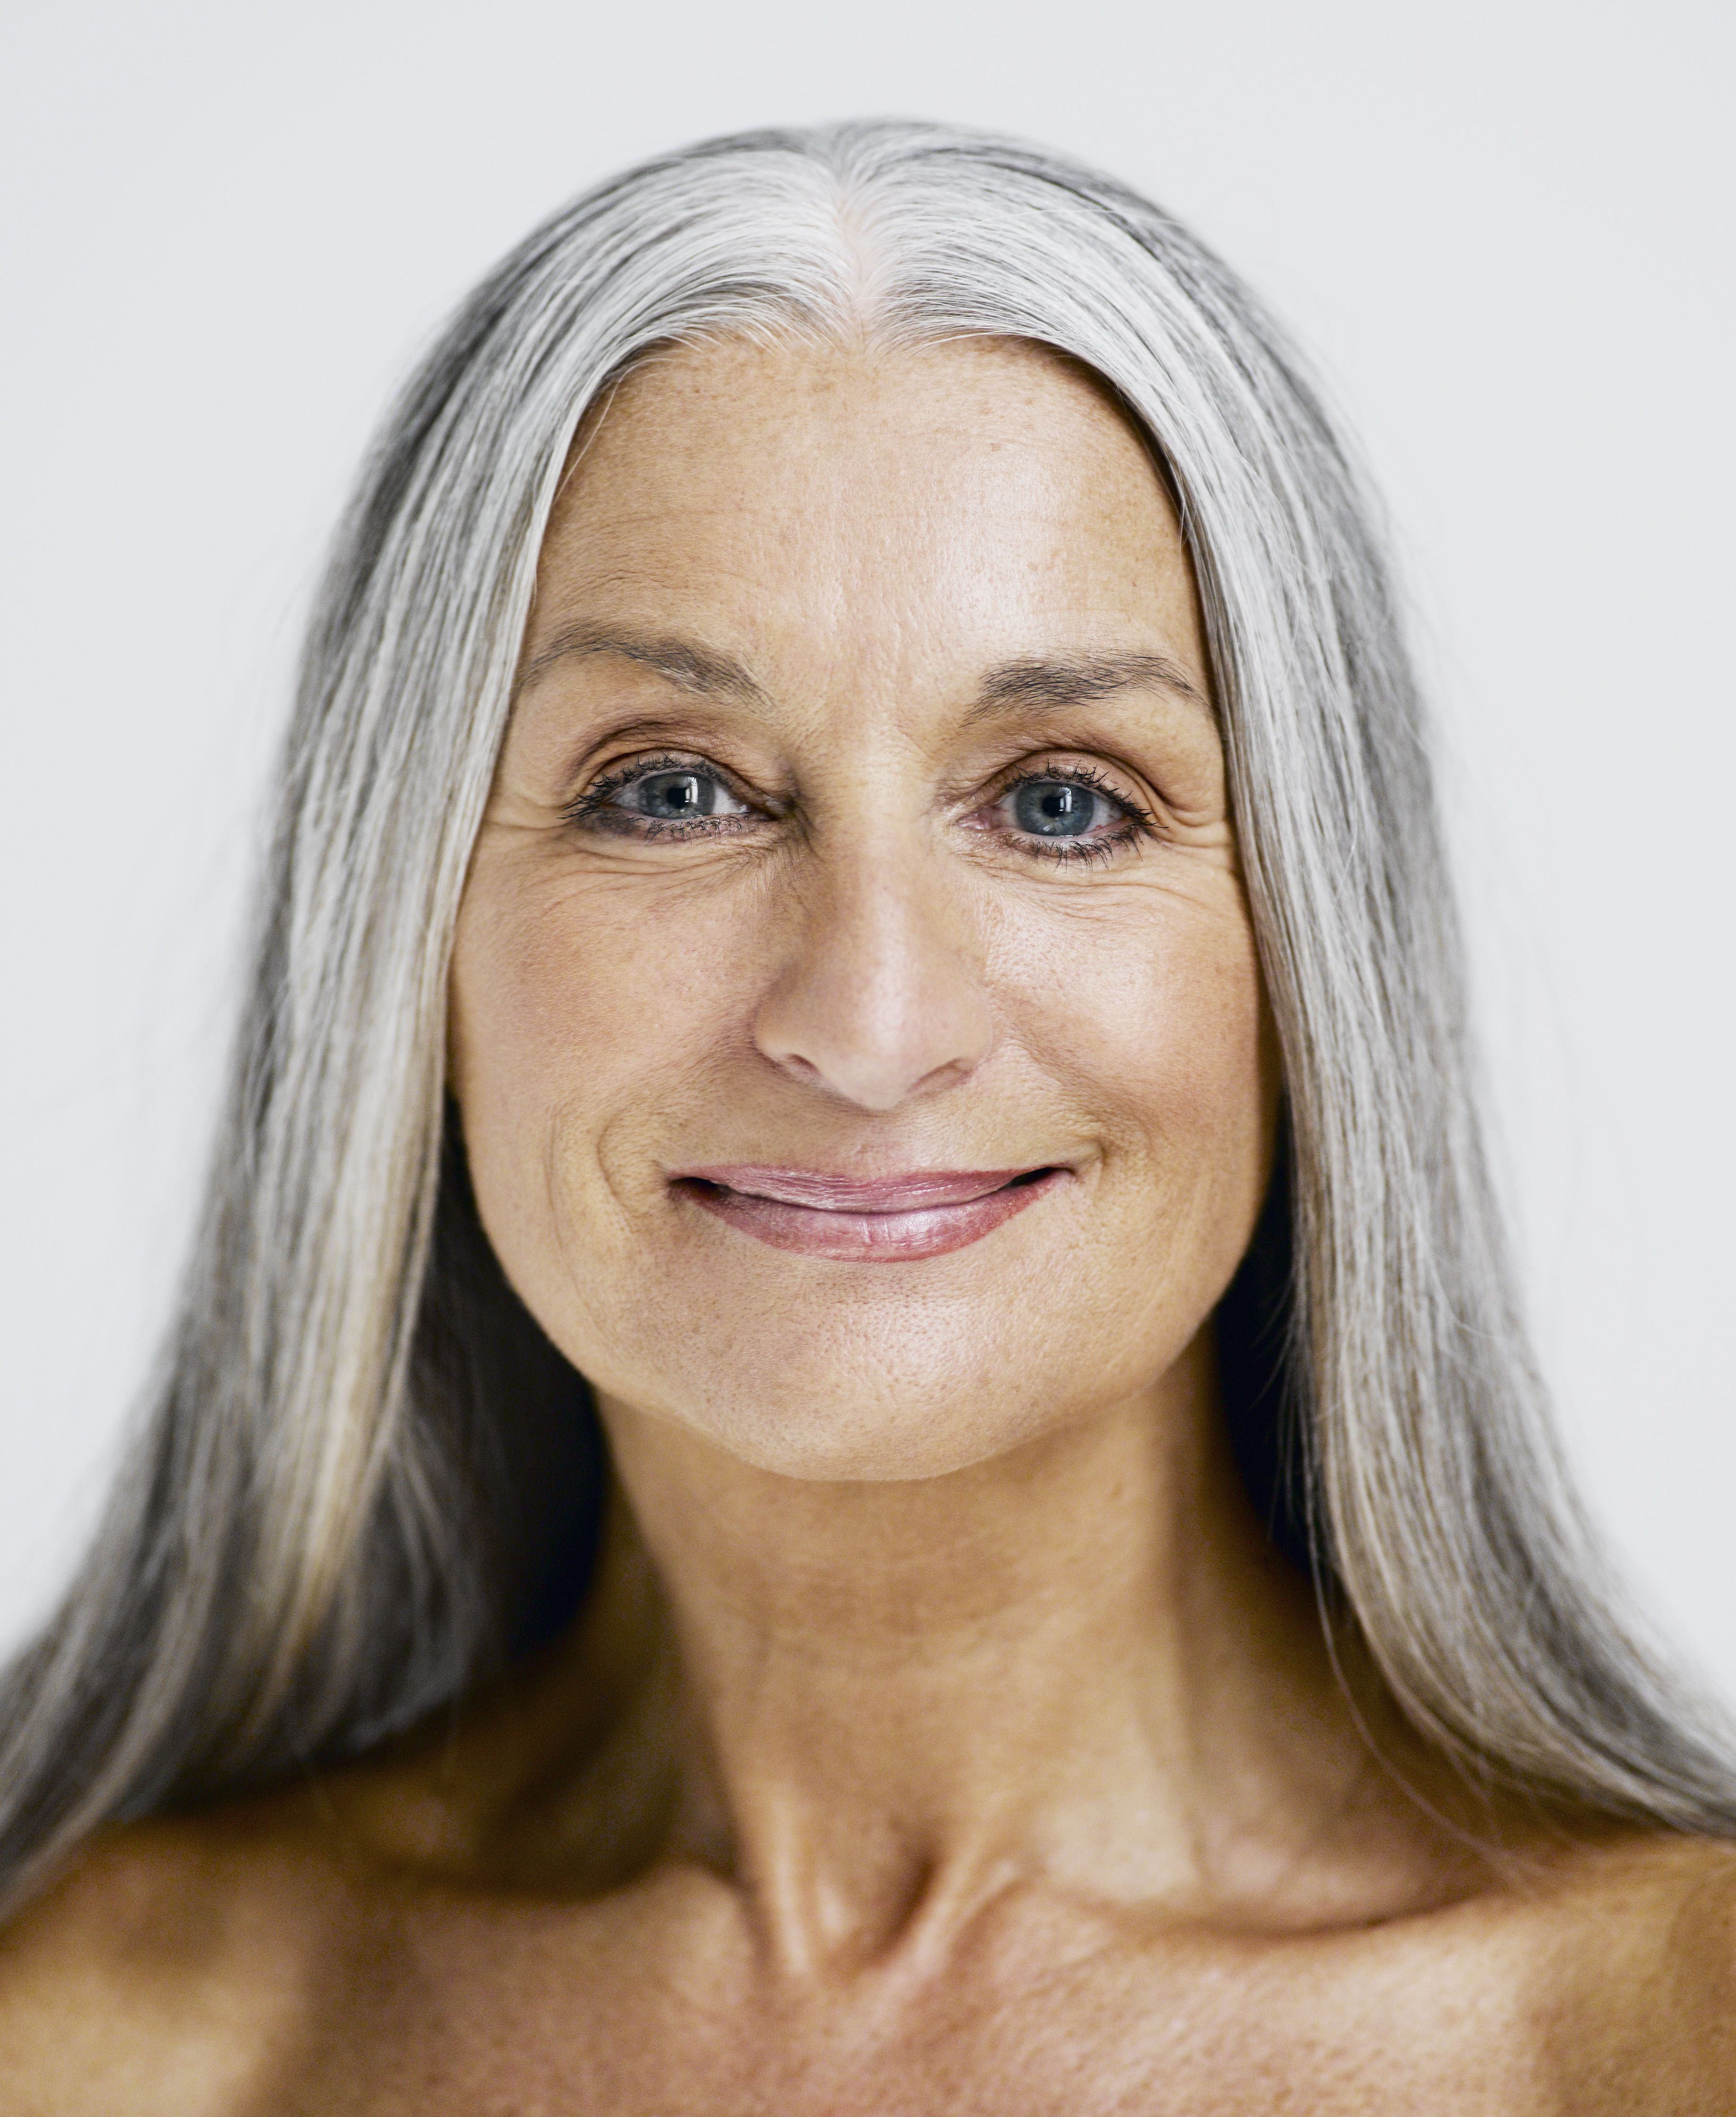 14 How should a 65 year old woman wear her hair for mens